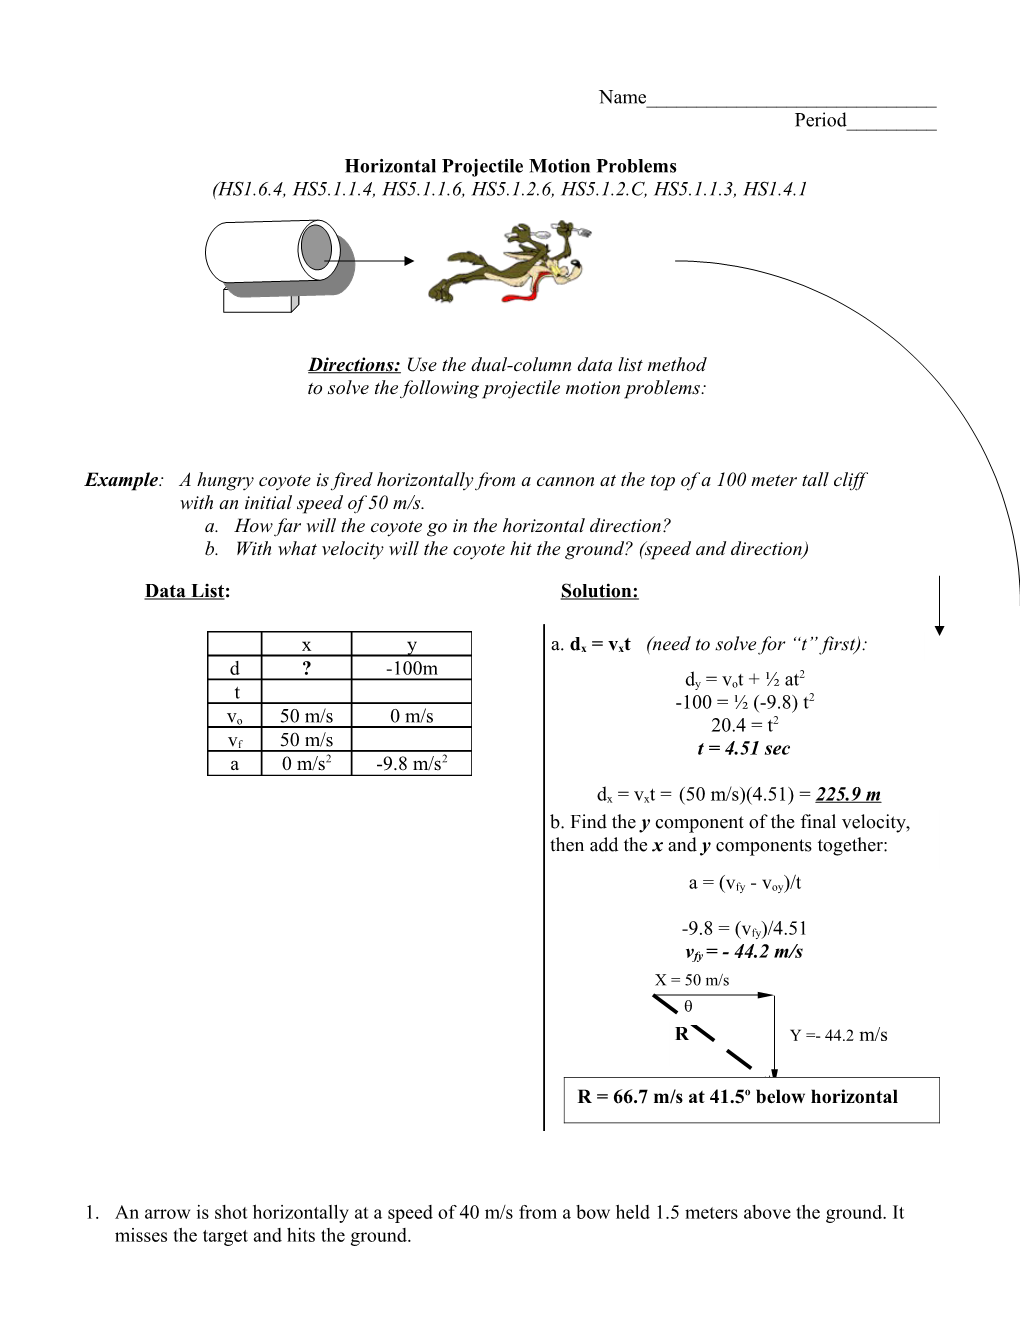 Horizontal Projectile Motion Problems s1